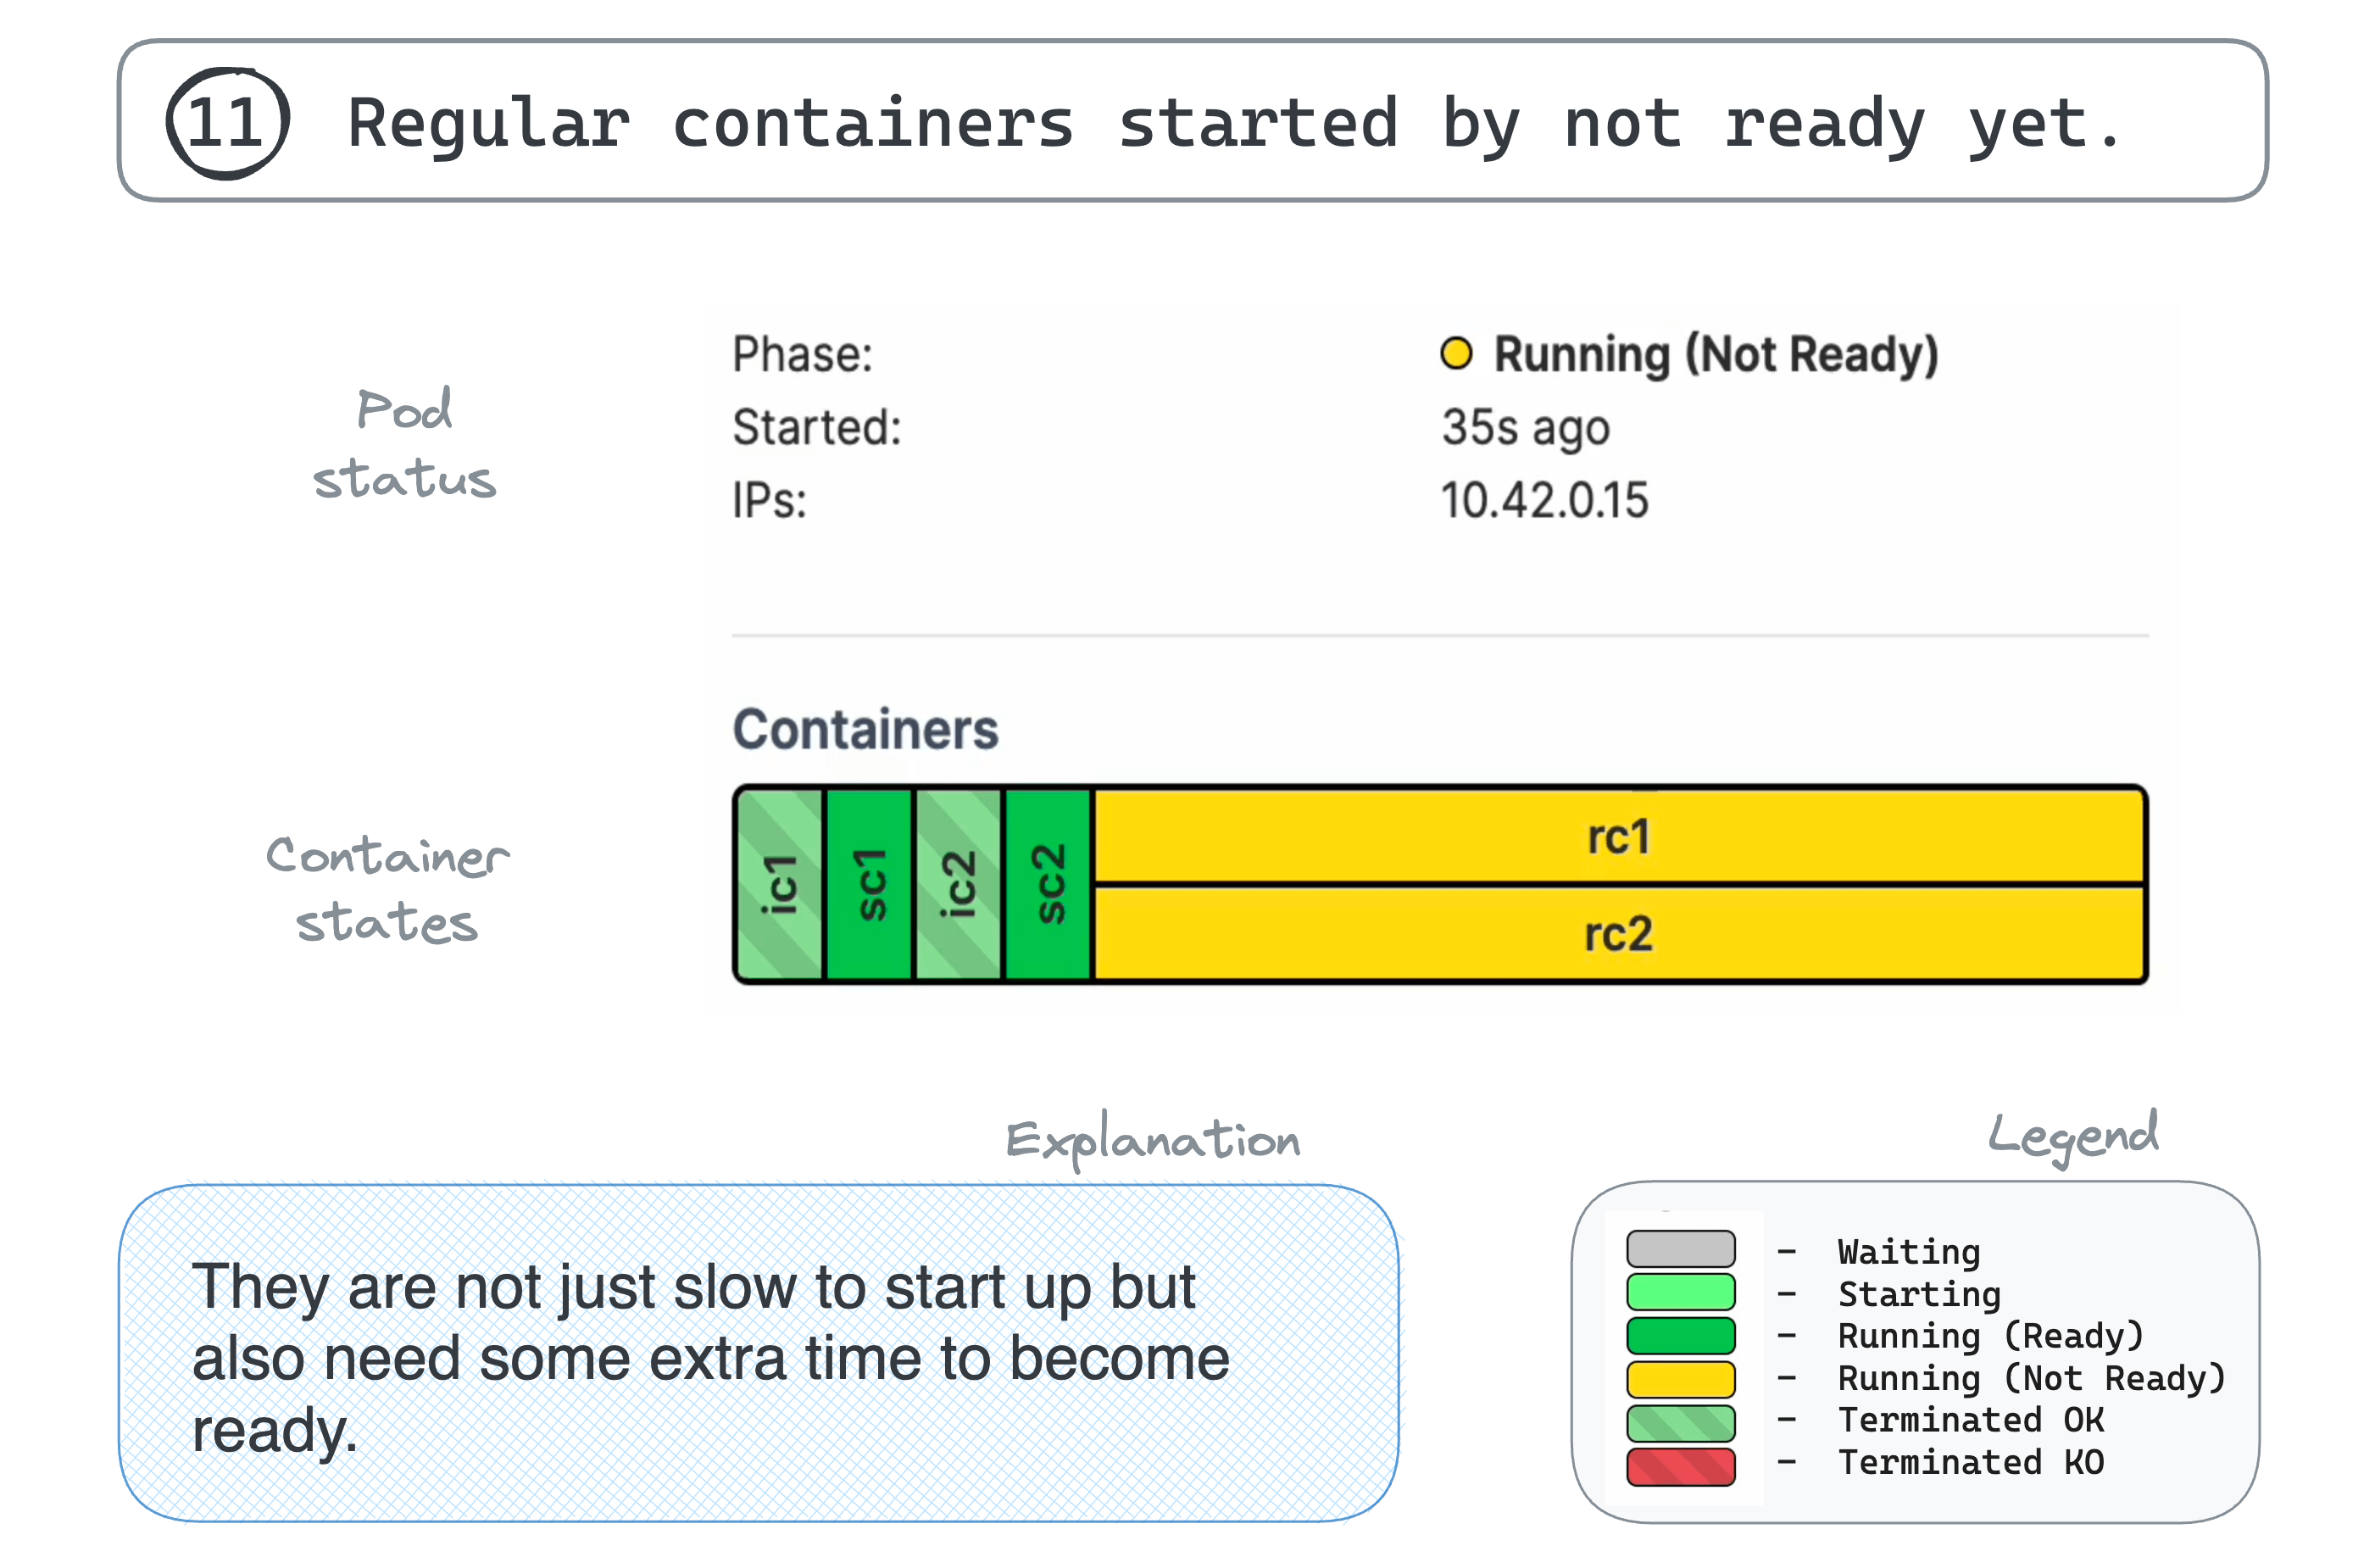 11. Regular containers started by not ready yet.